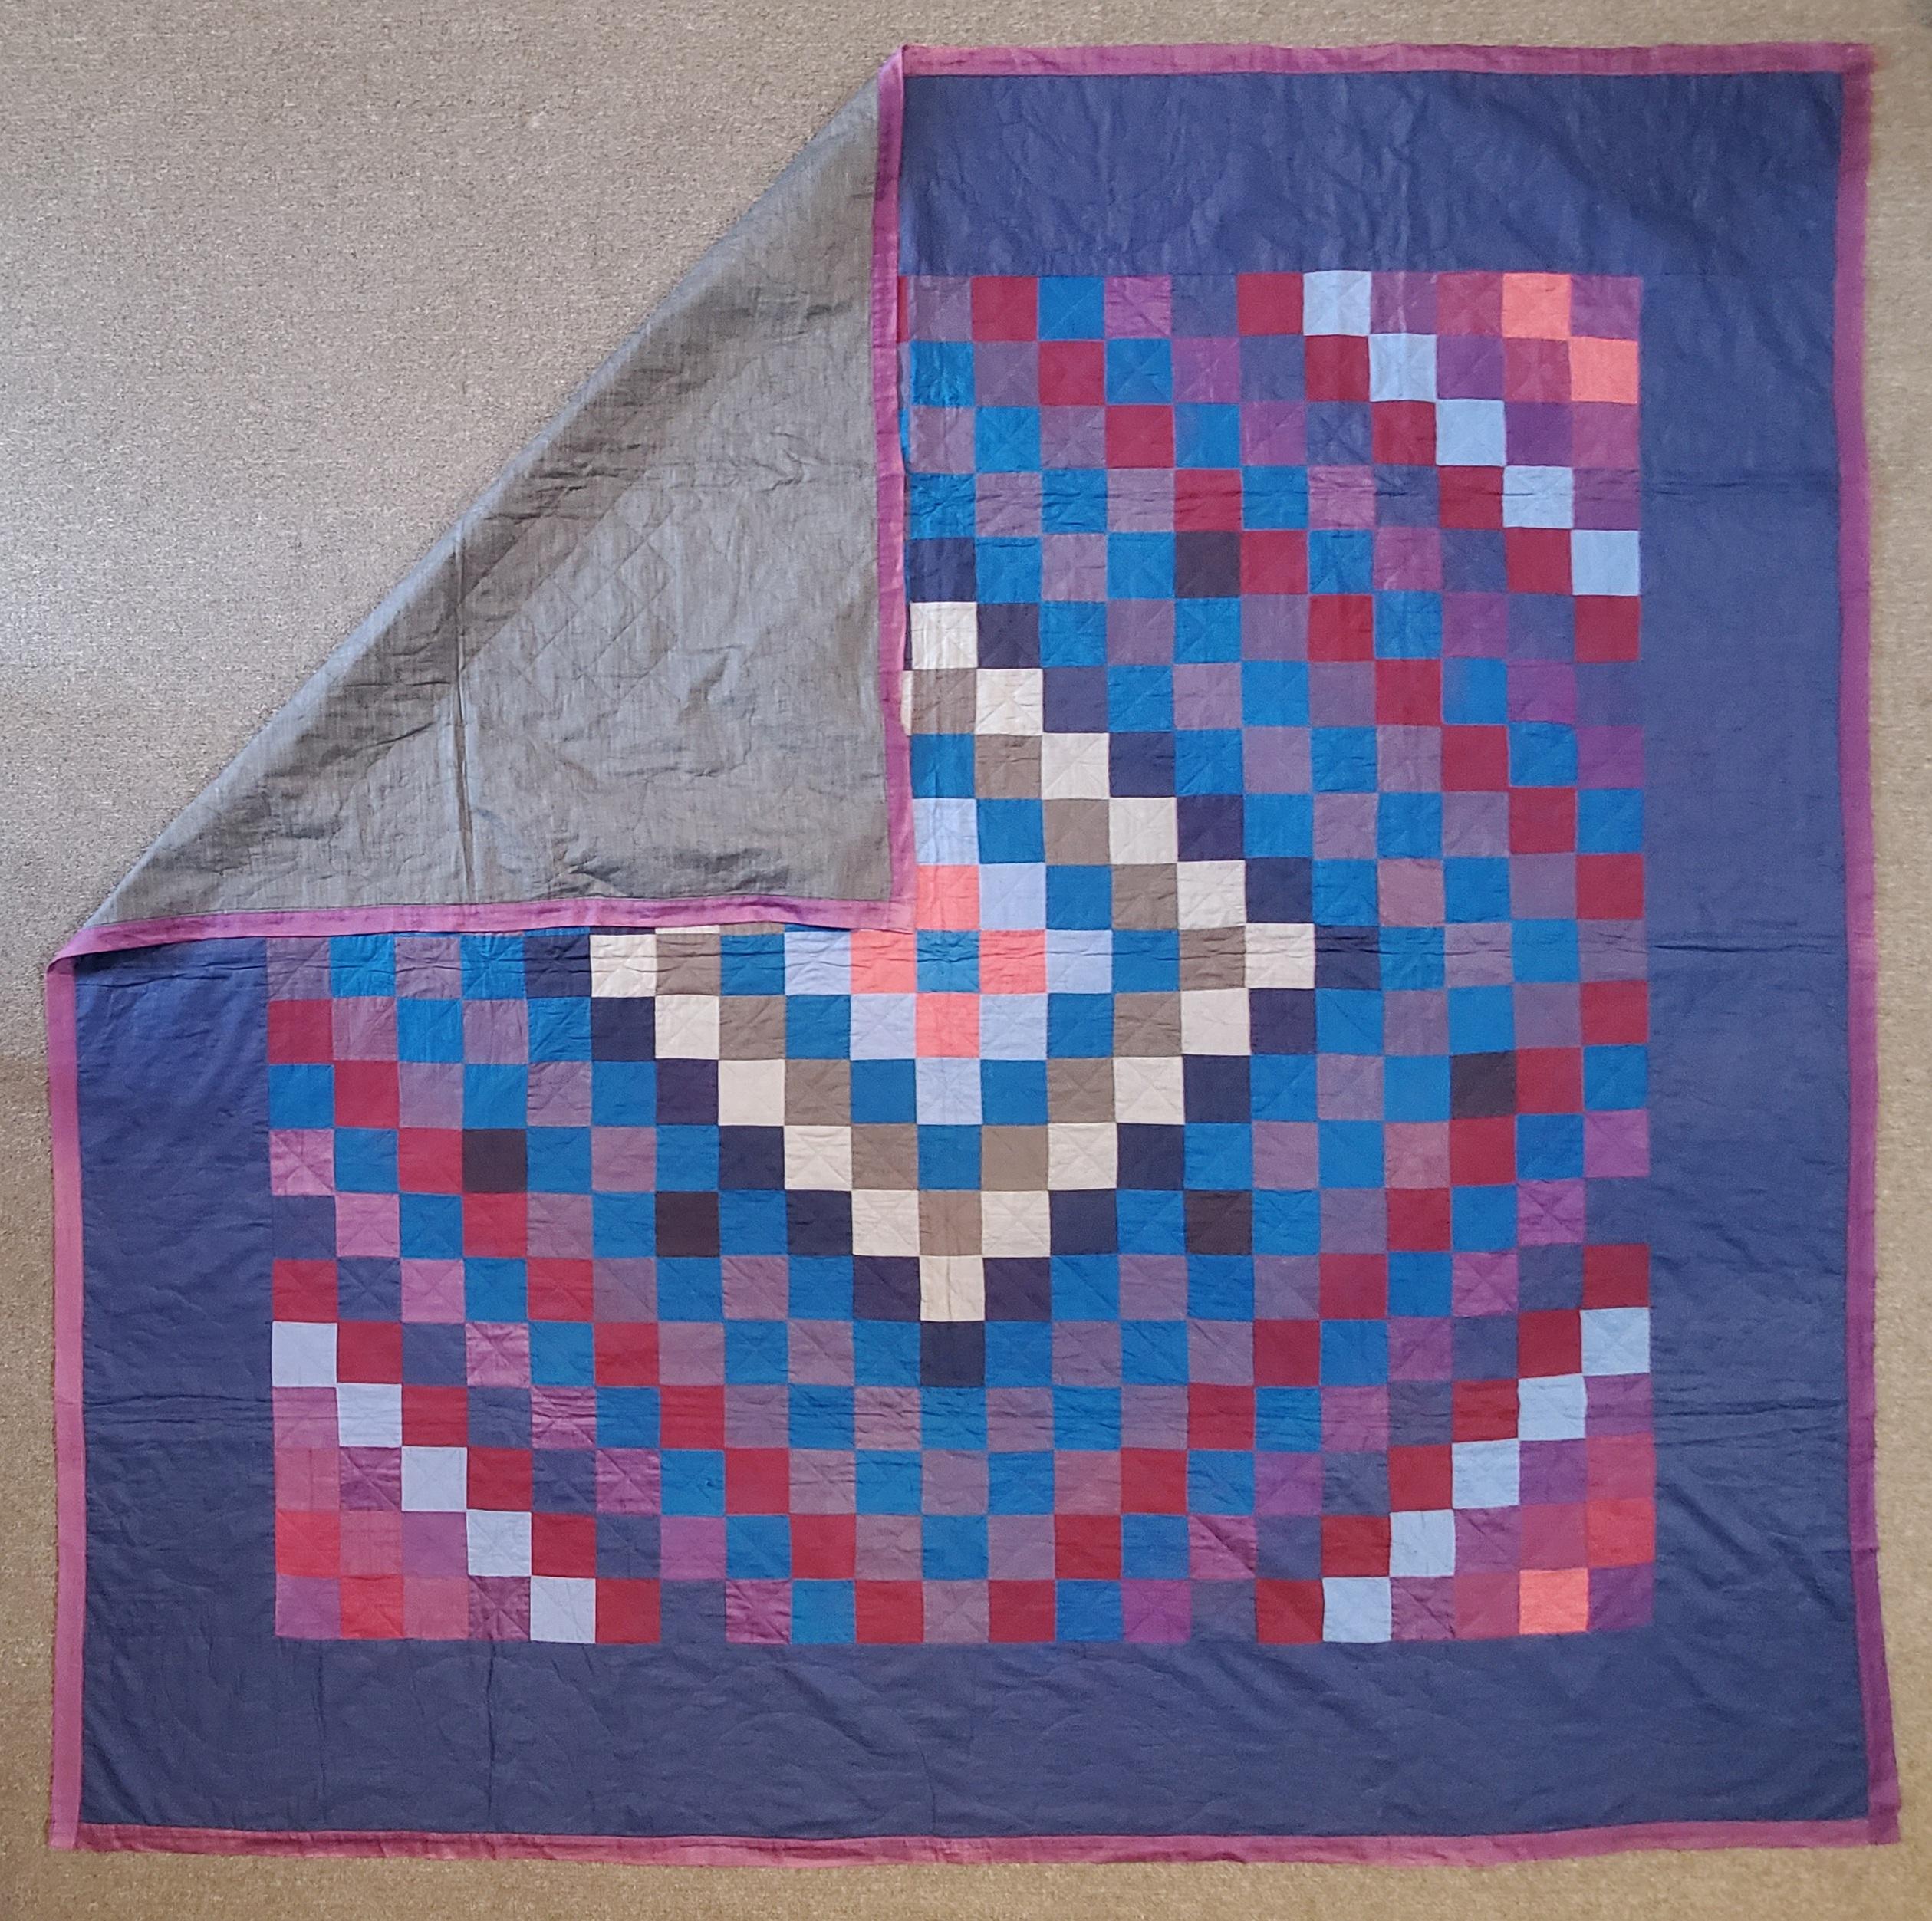 This Lancaster County, Pennsylvania Amish trip around the world pattern quilt is in fine condition. It is made from cotton and polished cotton blocks. The backing is in a polished cotton as well. The backing is in a grey shambrae polished cotton.